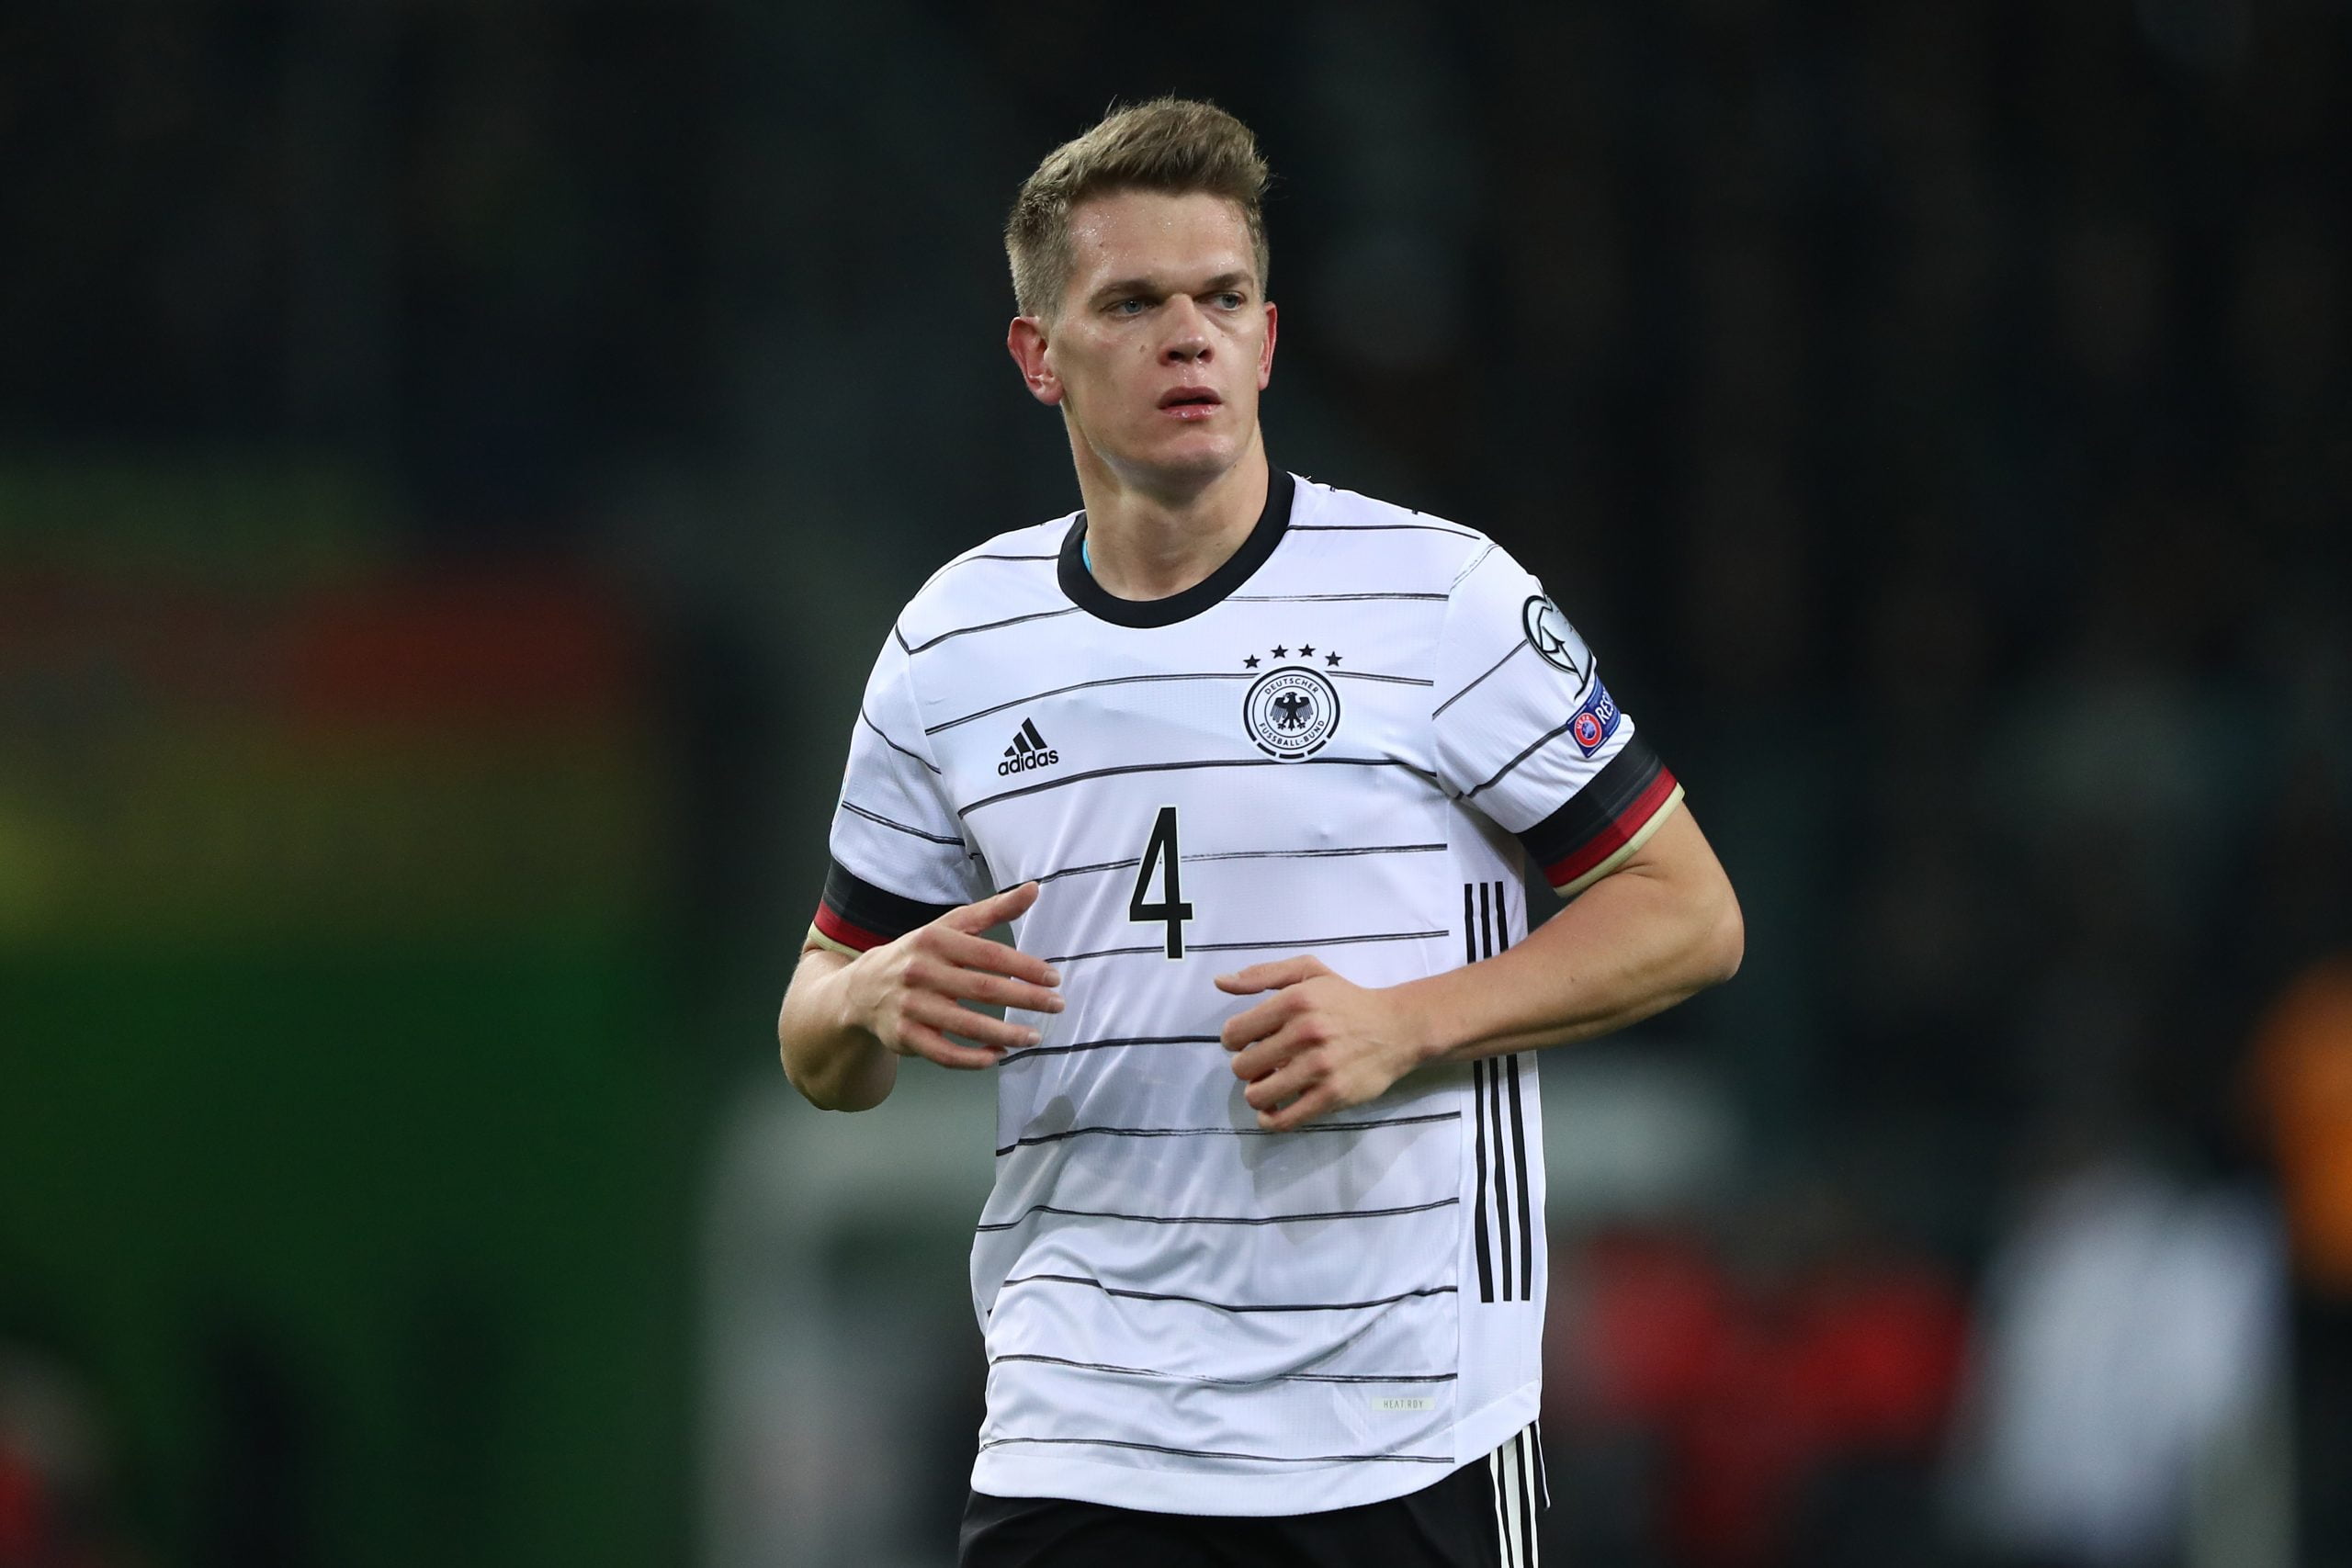 Arsenal are among clubs interested in Matthias Ginter - A fully fledged German international.